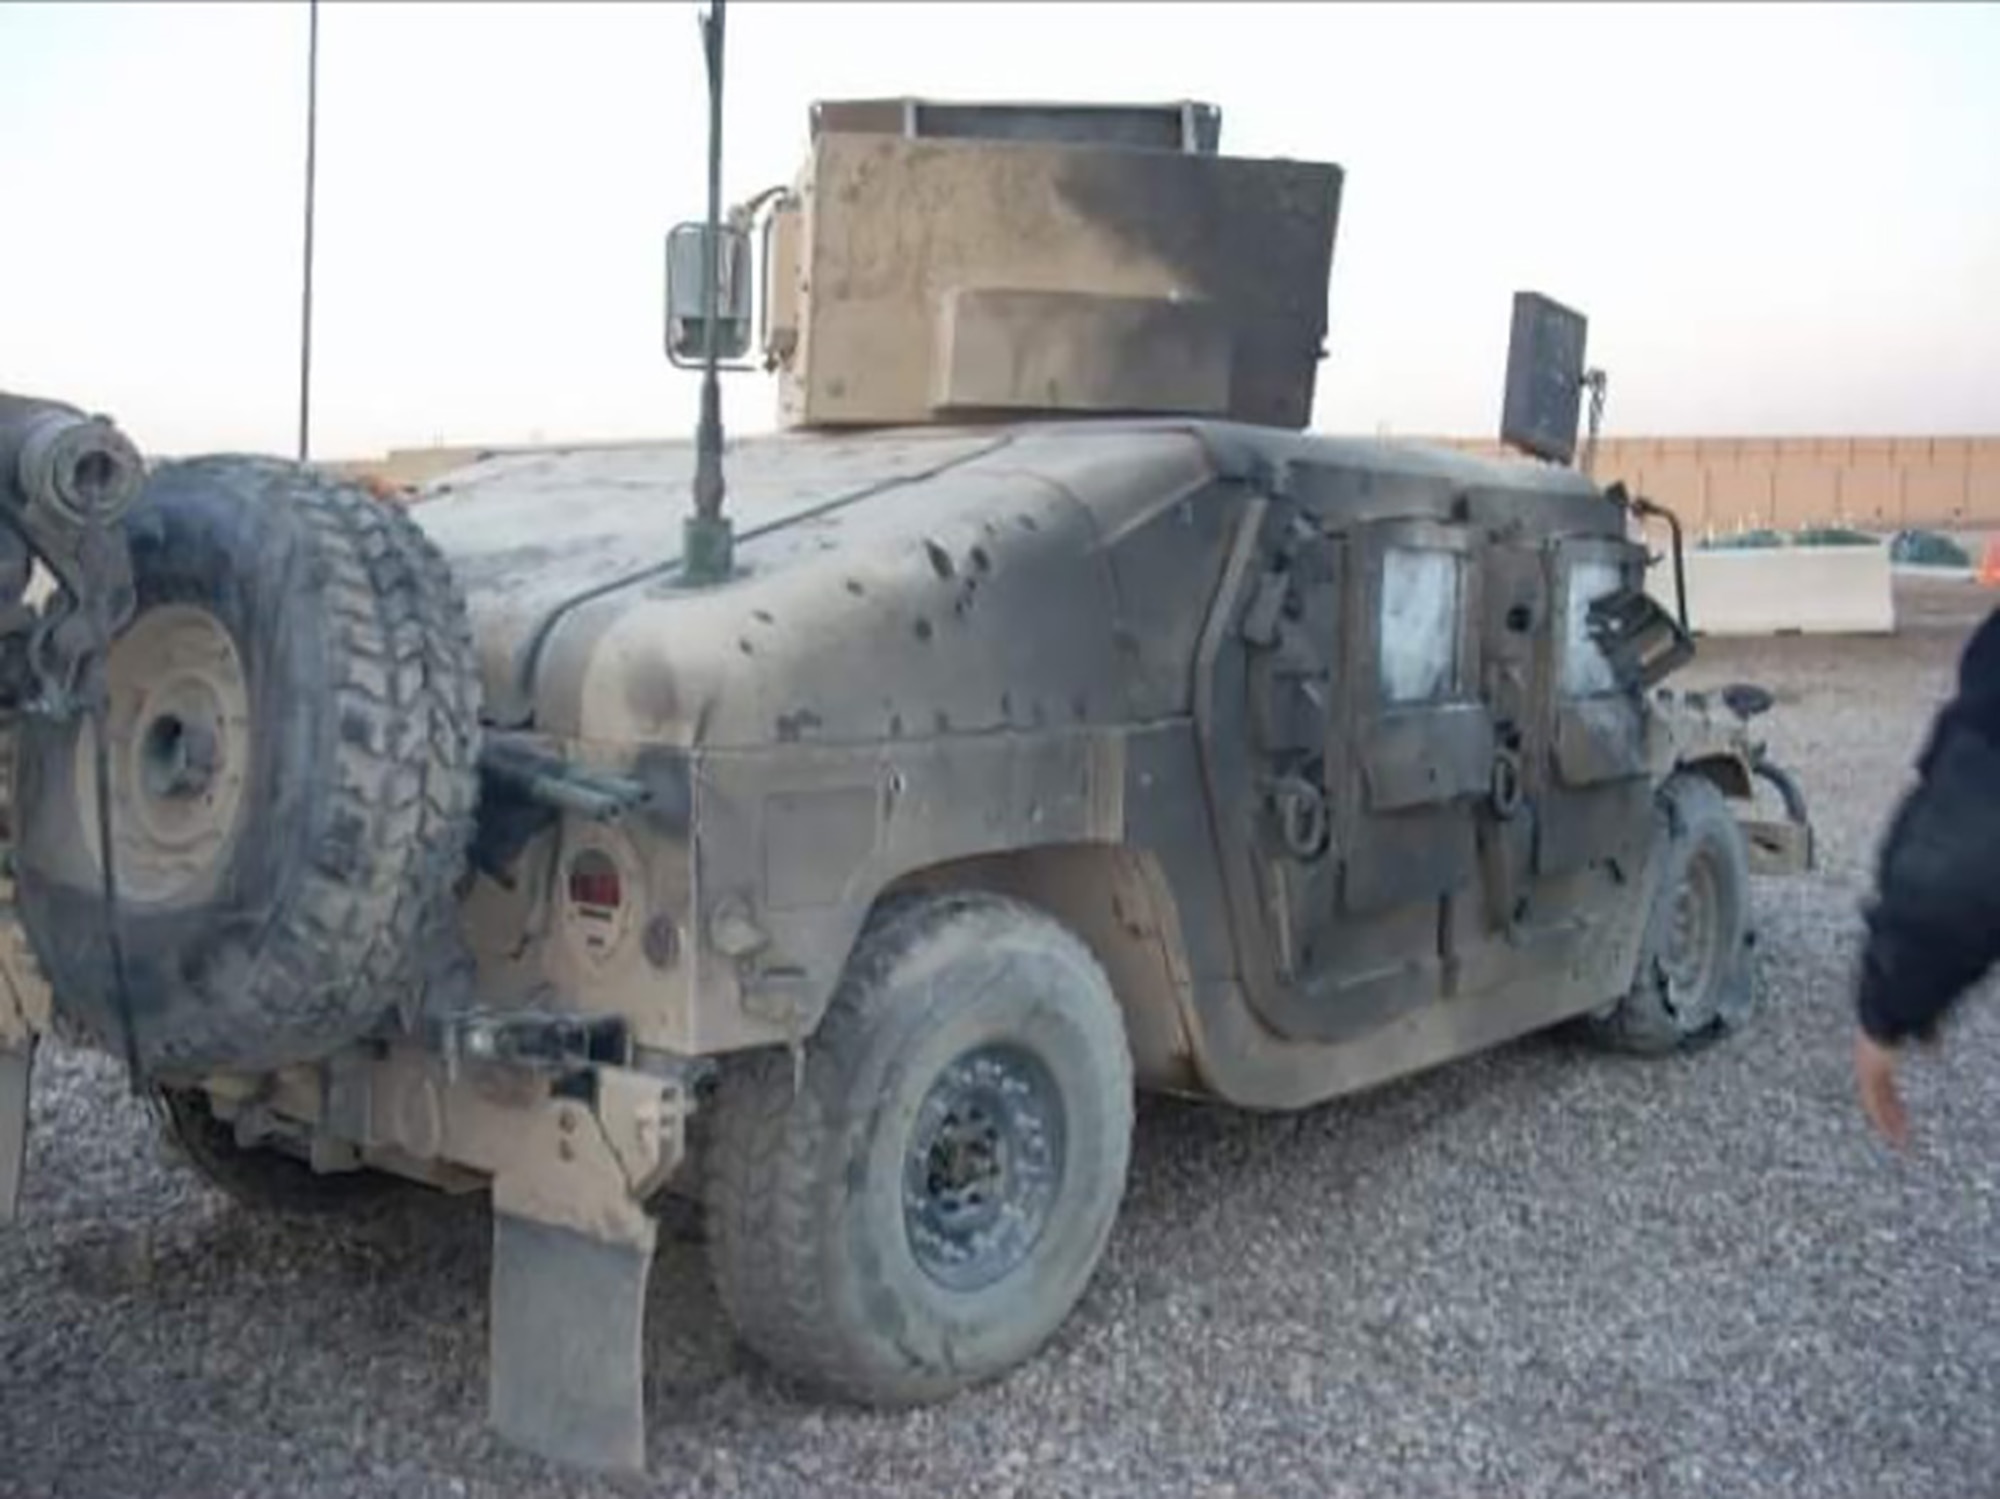 A Humvee is damaged and covered in burn marks after an improvised explosive device was detonated, also injuring then-Senior Airman Christopher D’Angelo, an 819th RED HORSE Squadron heavy equipment operator, Janu. 15, 2008. (Courtesy photo)